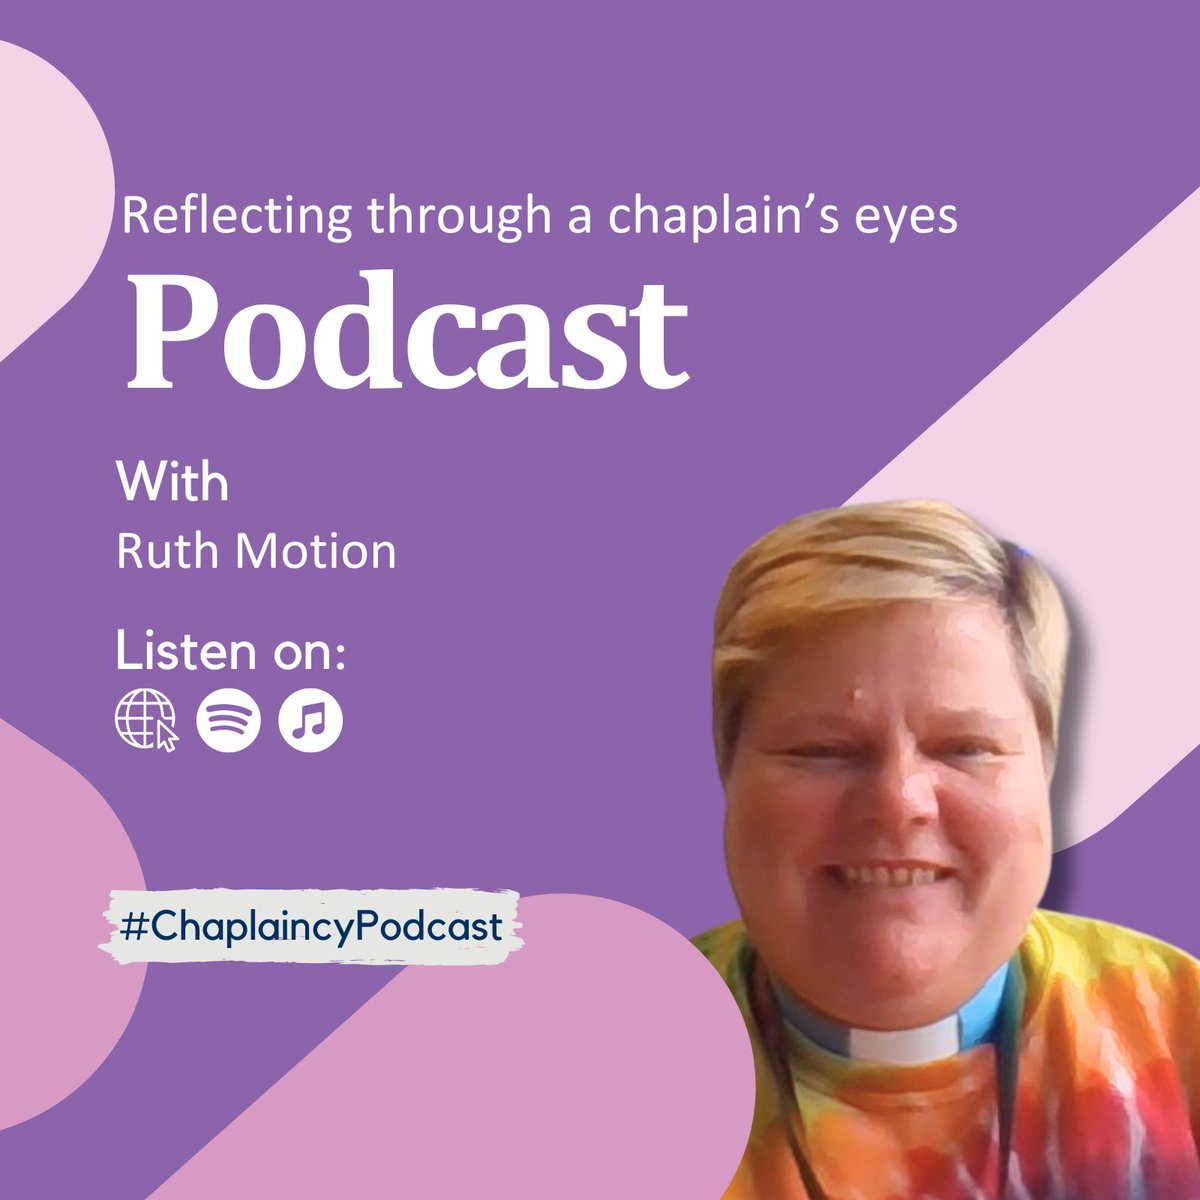 Latest episode of the 'Reflecting through a chaplain's eyes' podcast is out now. Richard Kelley chats faith sharing, the church & #chaplaincy with Ruth Motion, Chaplain at @kowessex Cheddar. Listen zurl.co/Zw4H & sign up to for the online discussion.